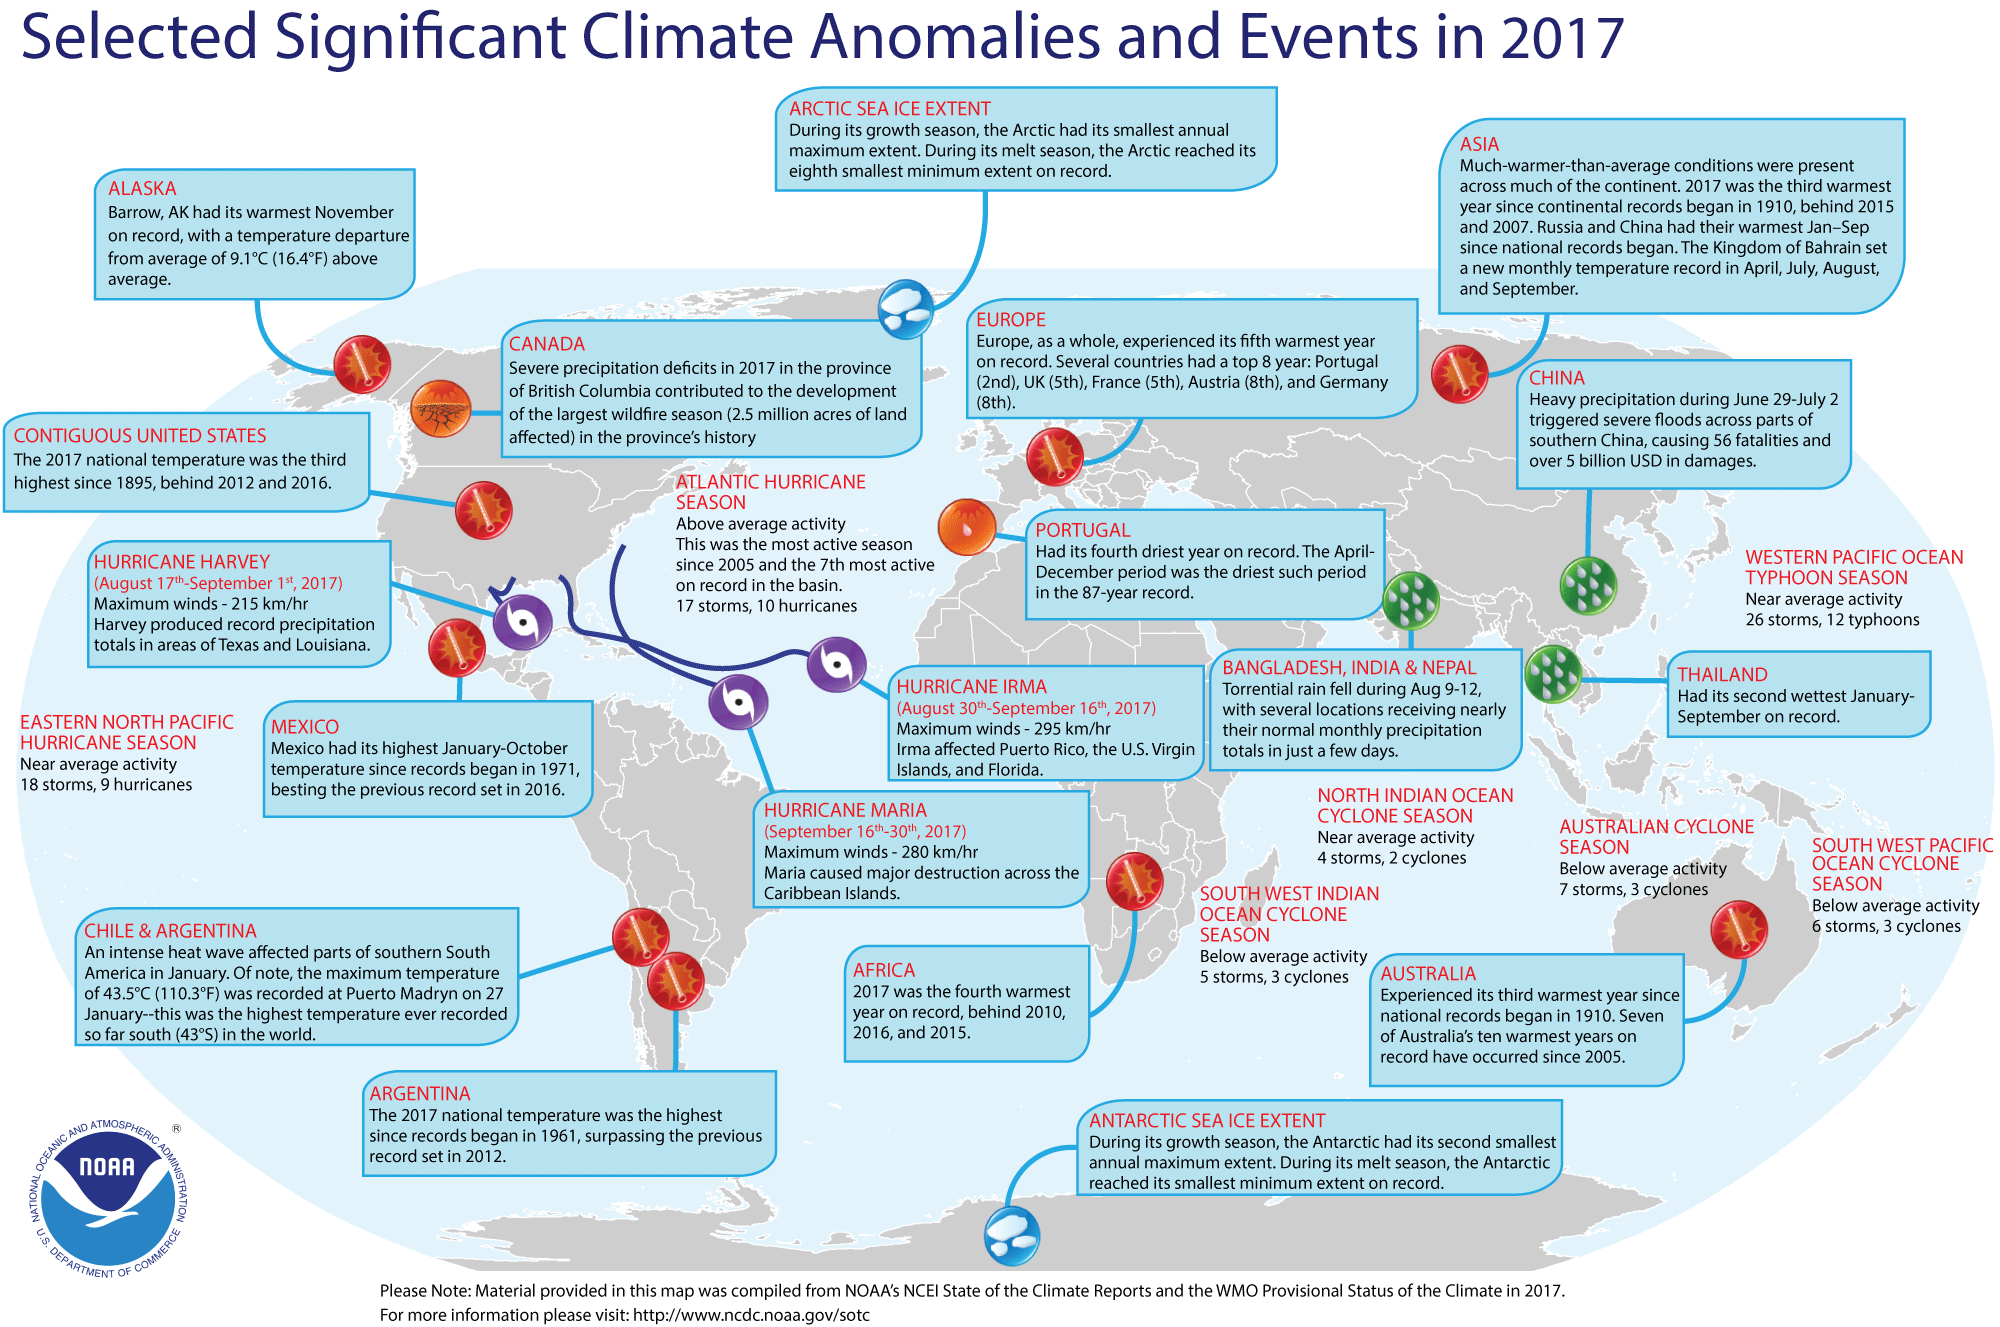 A map of the globe of that indicates noteworthy climate and weather events that occurred around the world in 2017.